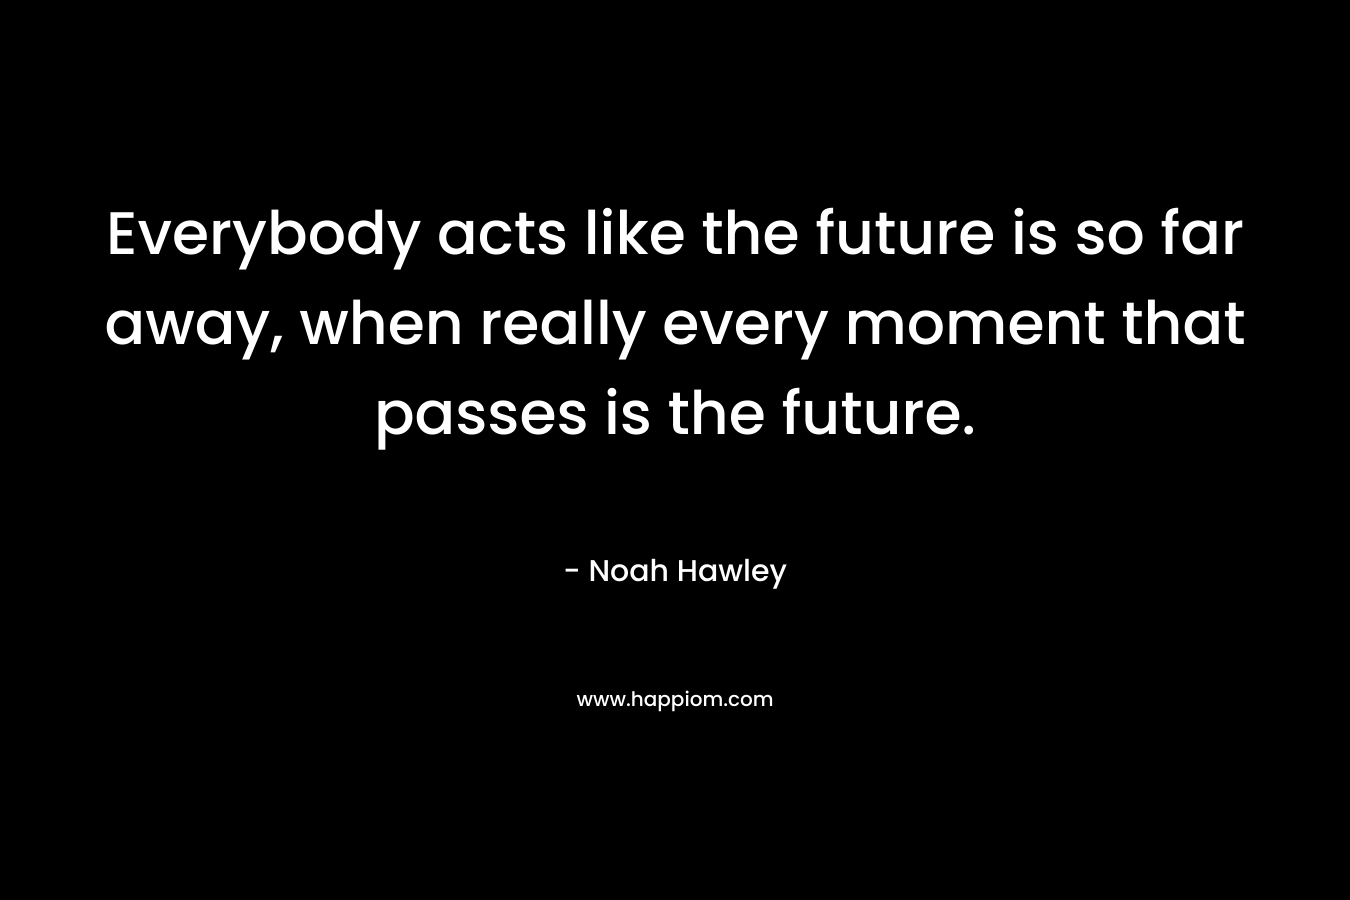 Everybody acts like the future is so far away, when really every moment that passes is the future.